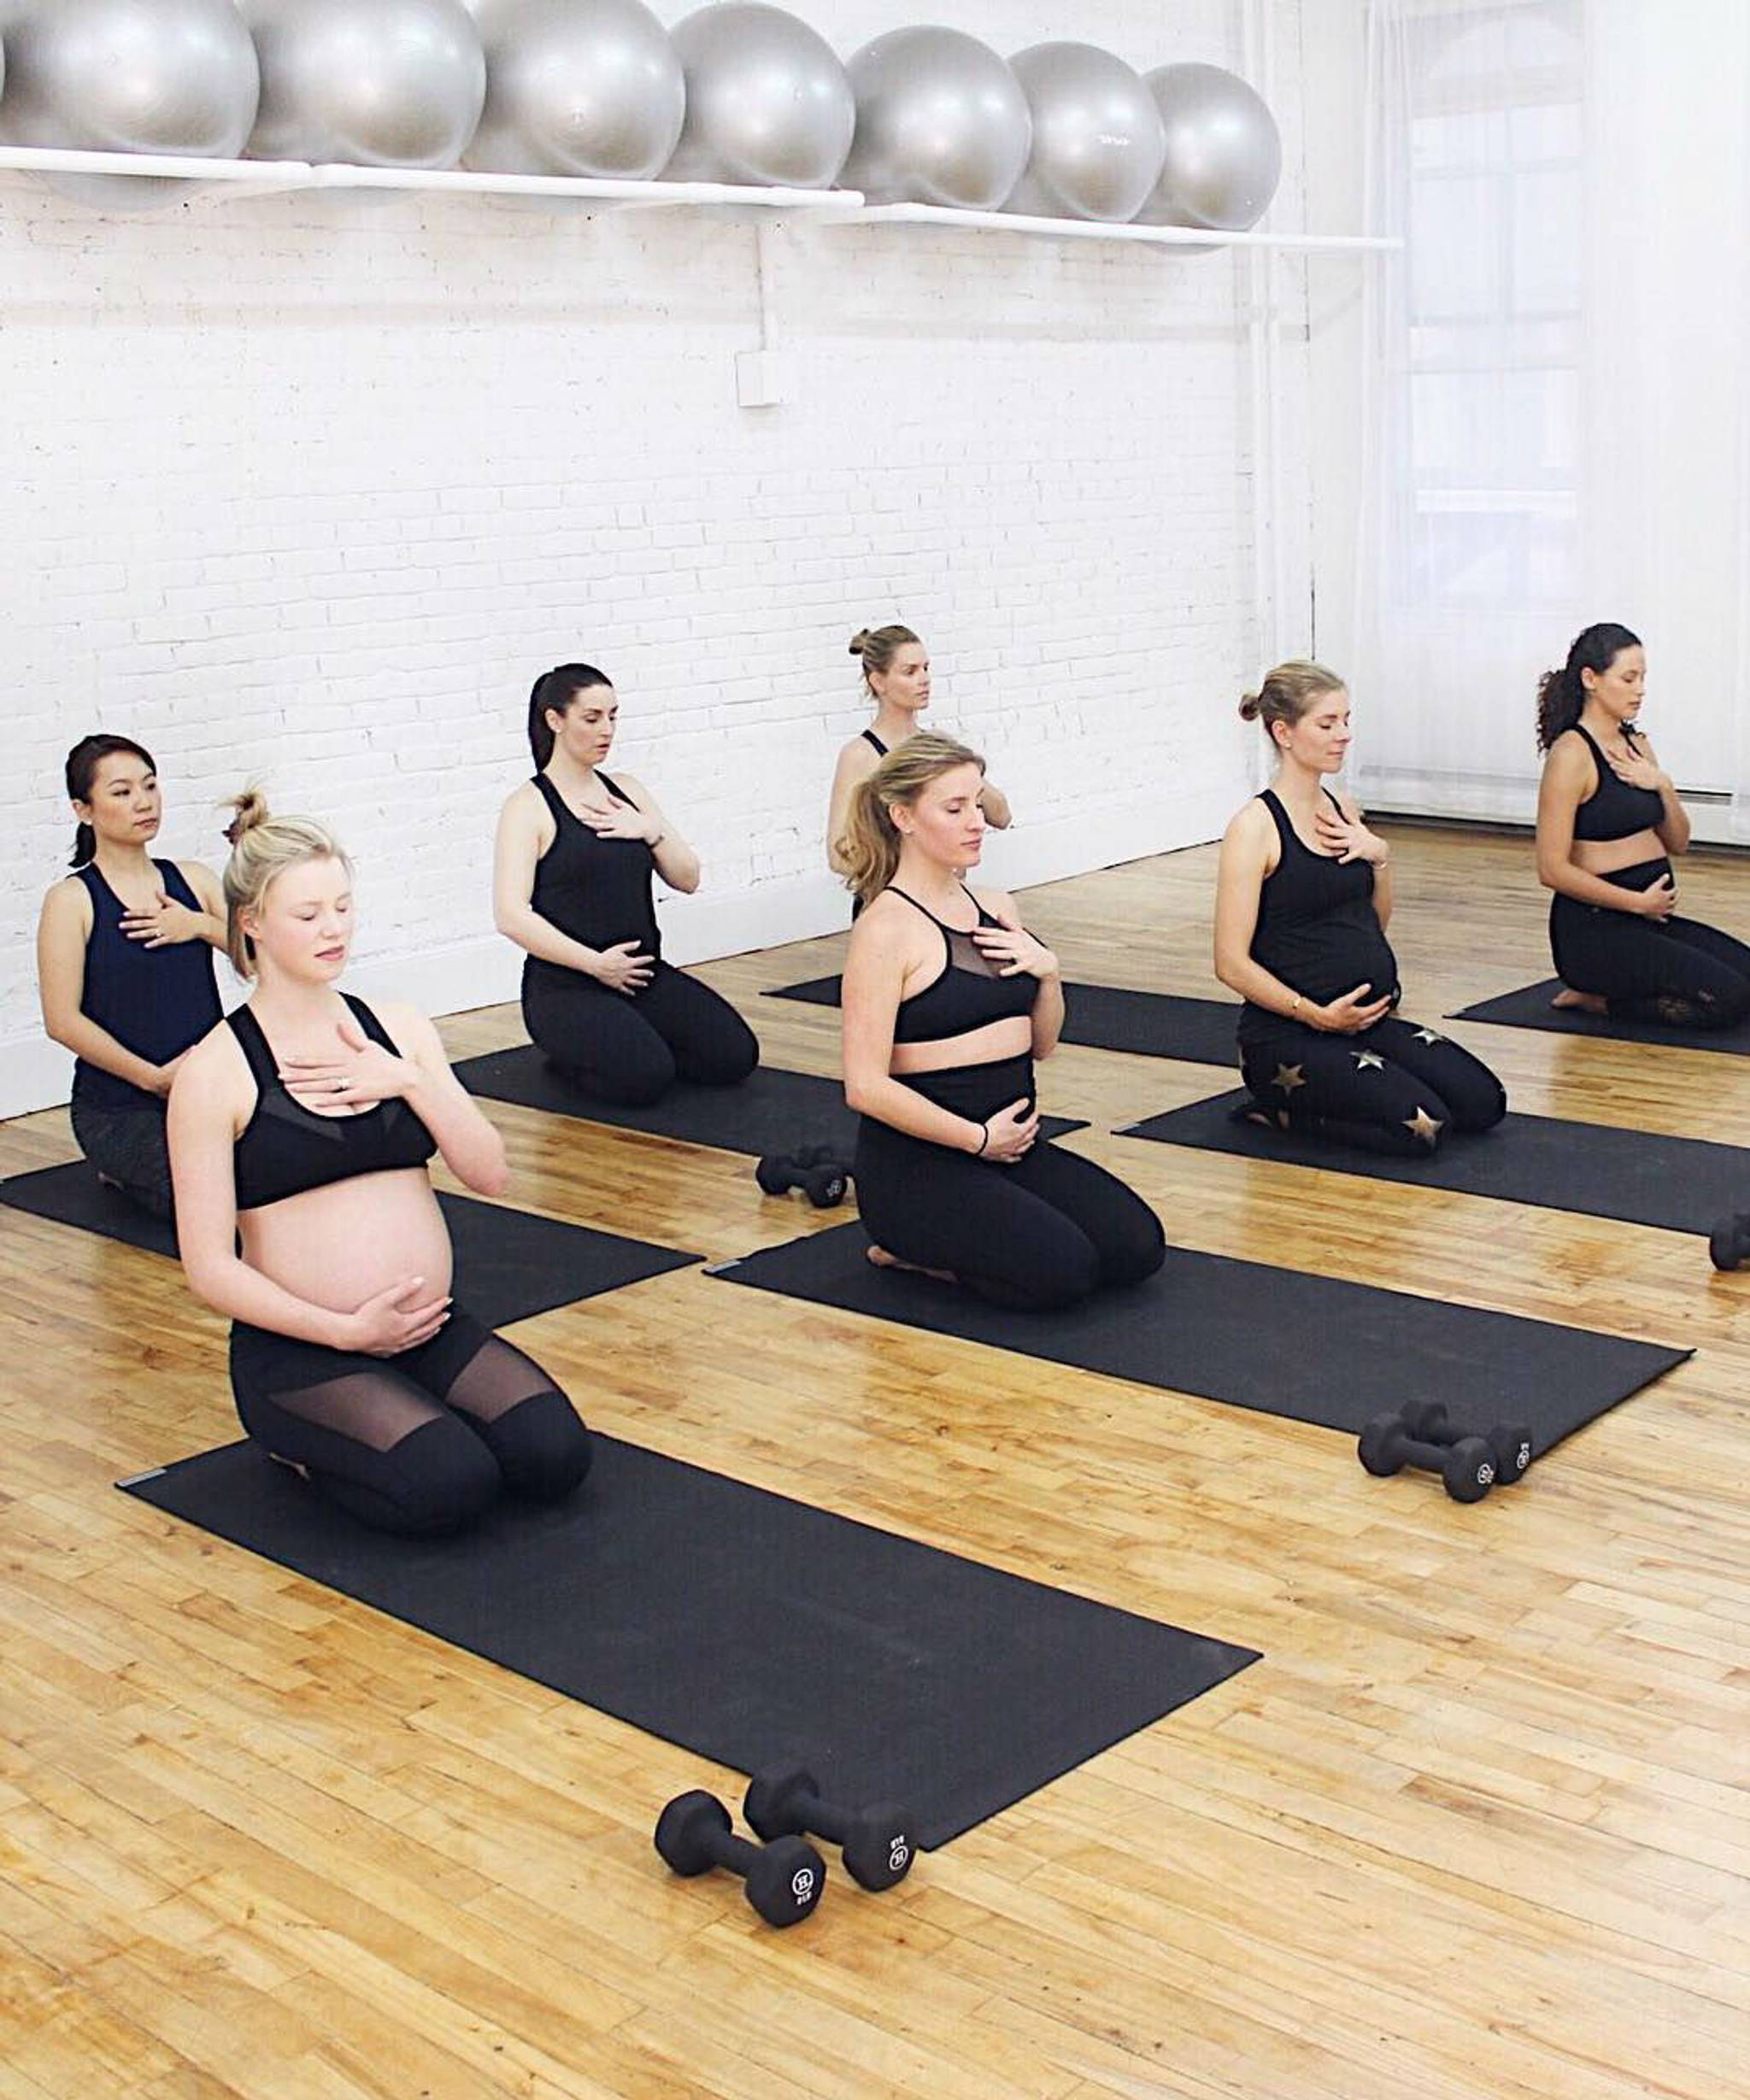 Fit Pregnancy Club helps mums-to-be exercise safely